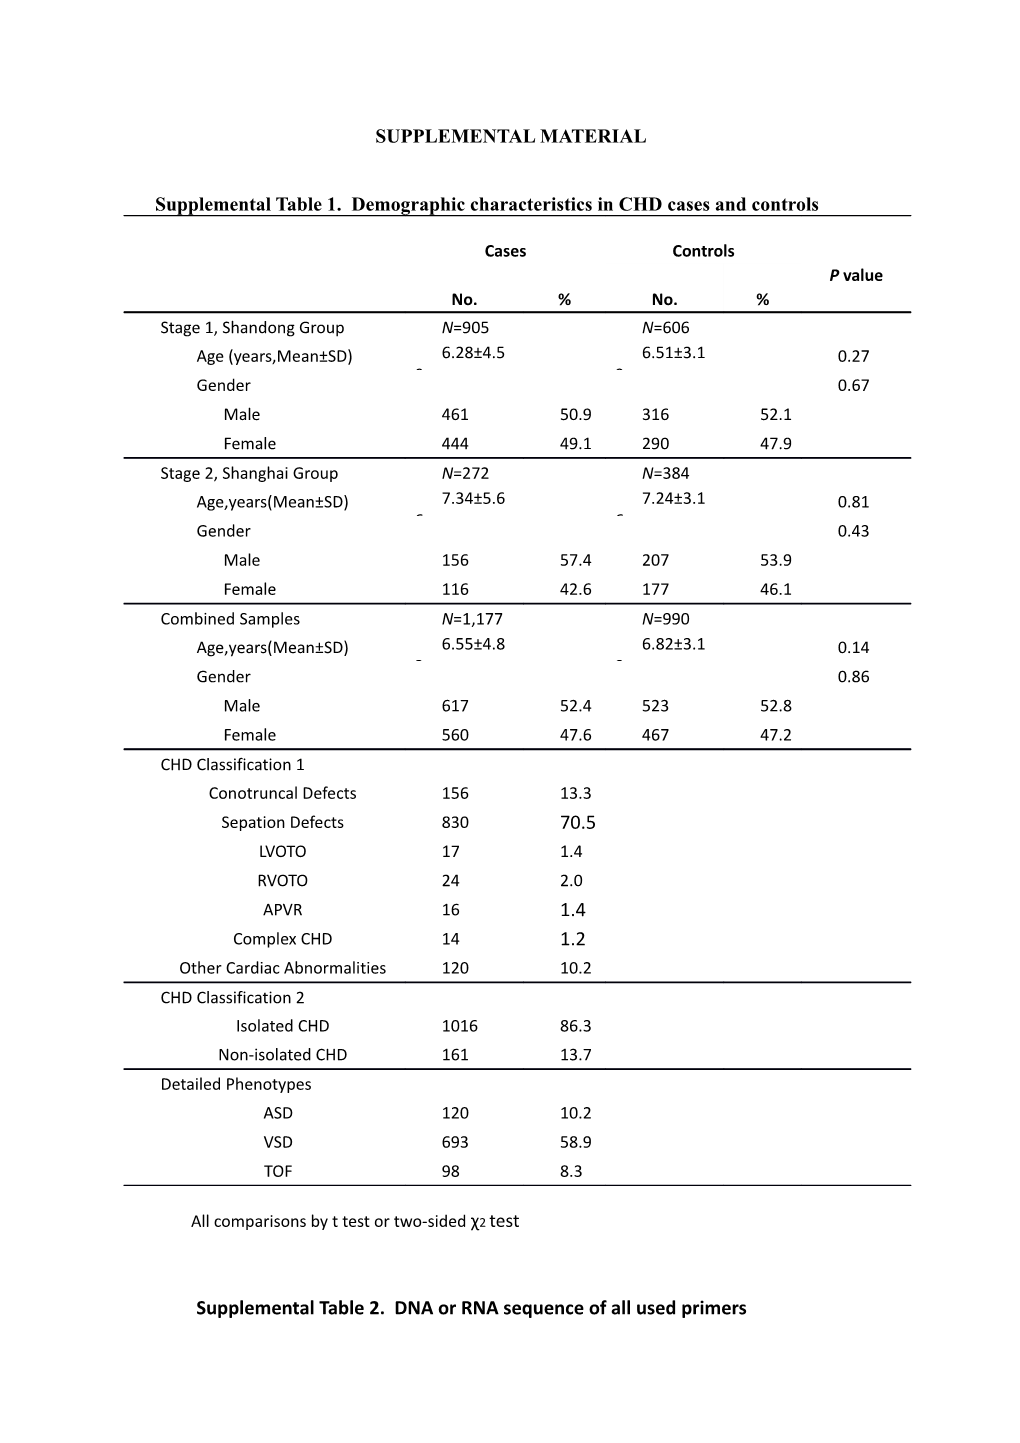 Supplemental Table 1. Demographic Characteristics in CHD Cases and Controls